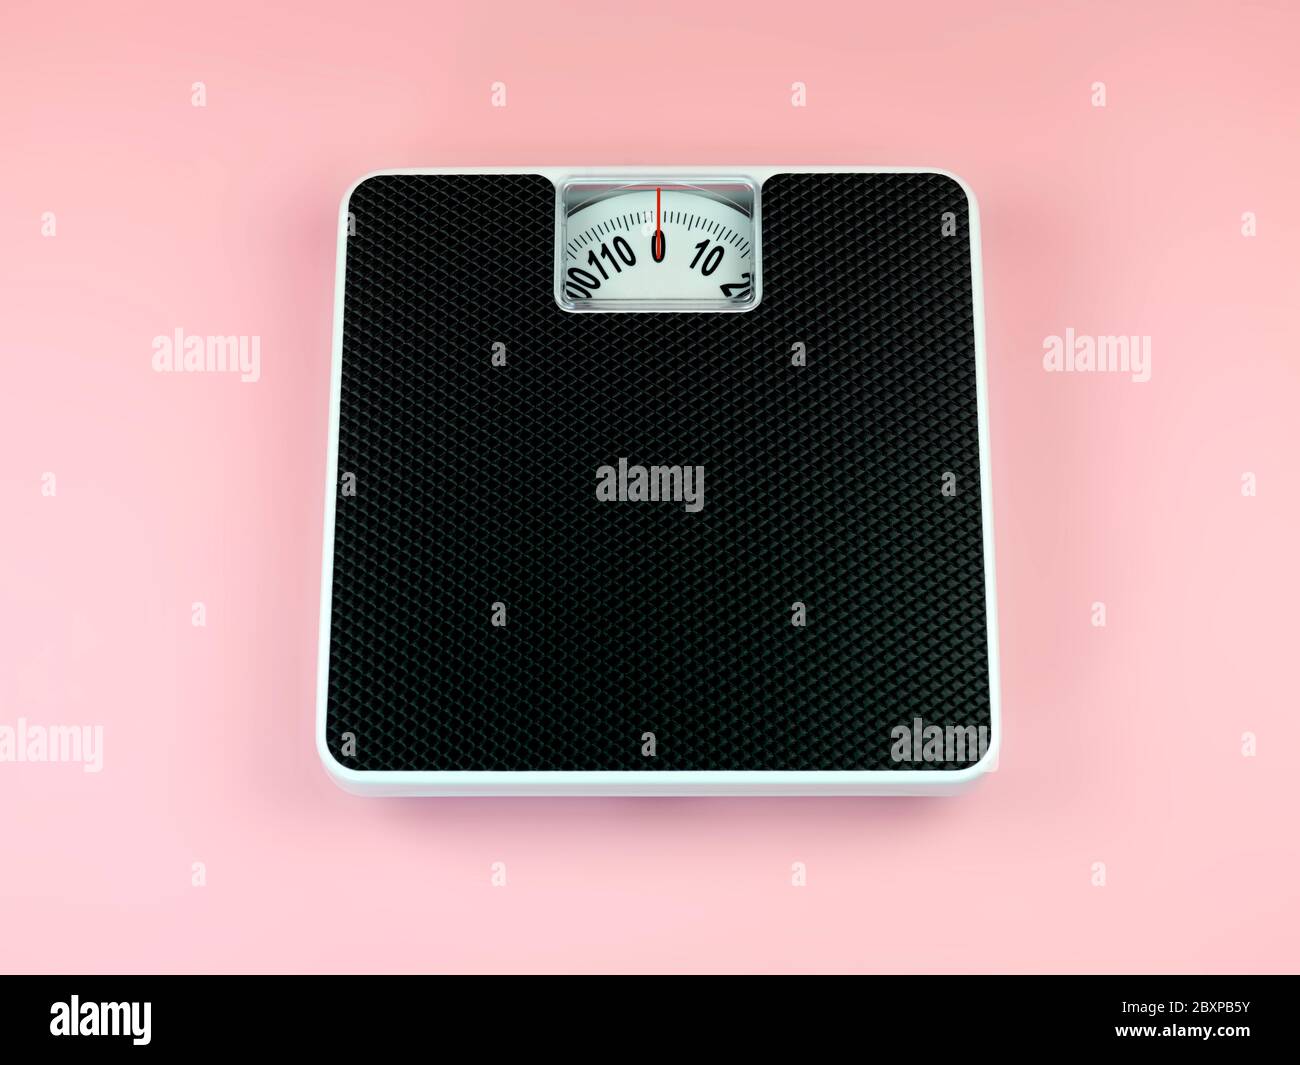 https://c8.alamy.com/comp/2BXPB5Y/a-set-of-bathroom-scales-isolated-against-a-pink-background-2BXPB5Y.jpg